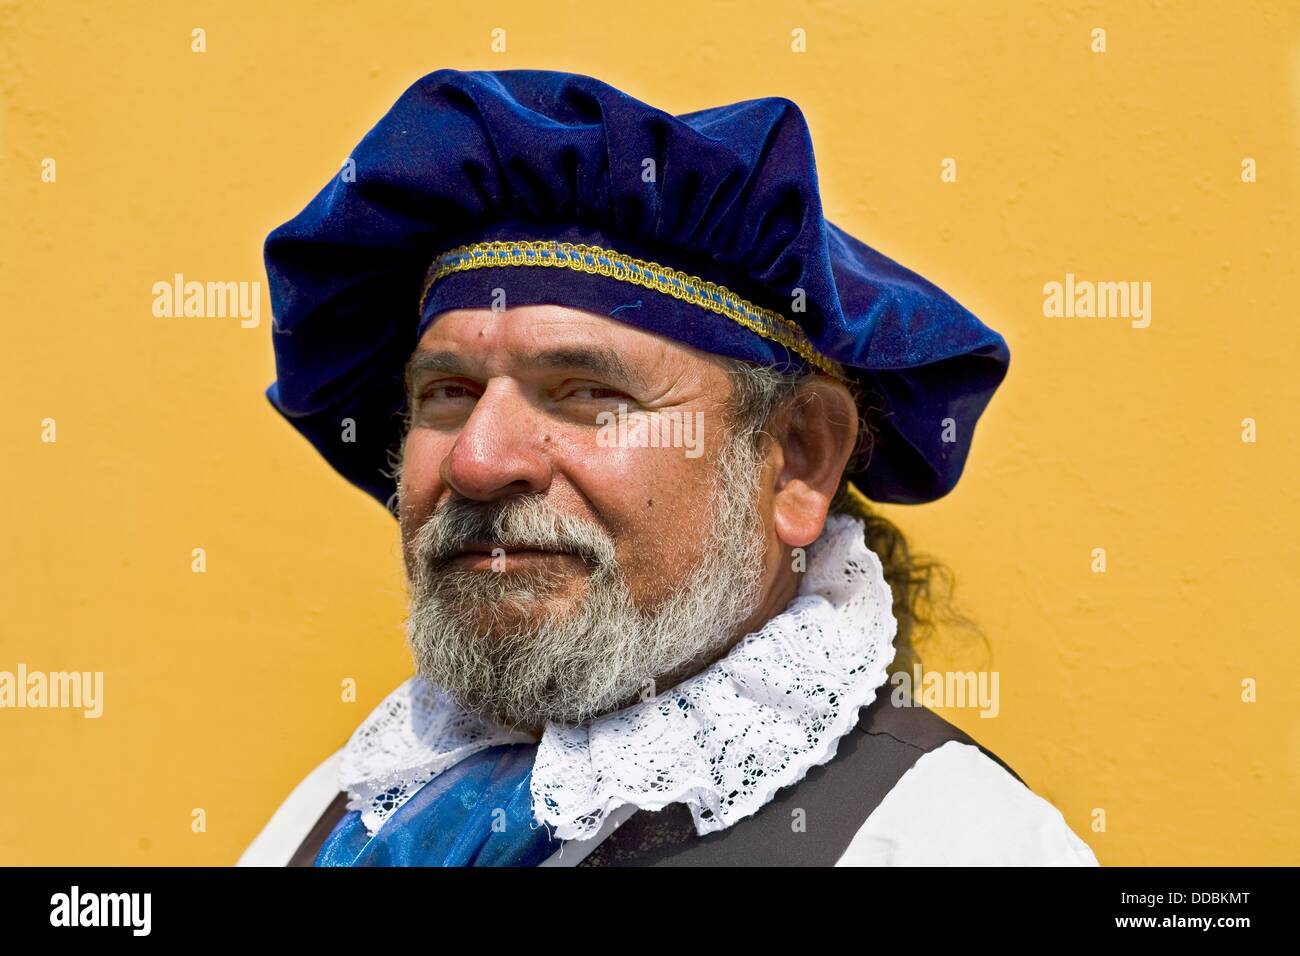 Man in Colonial period costume Stock Photo